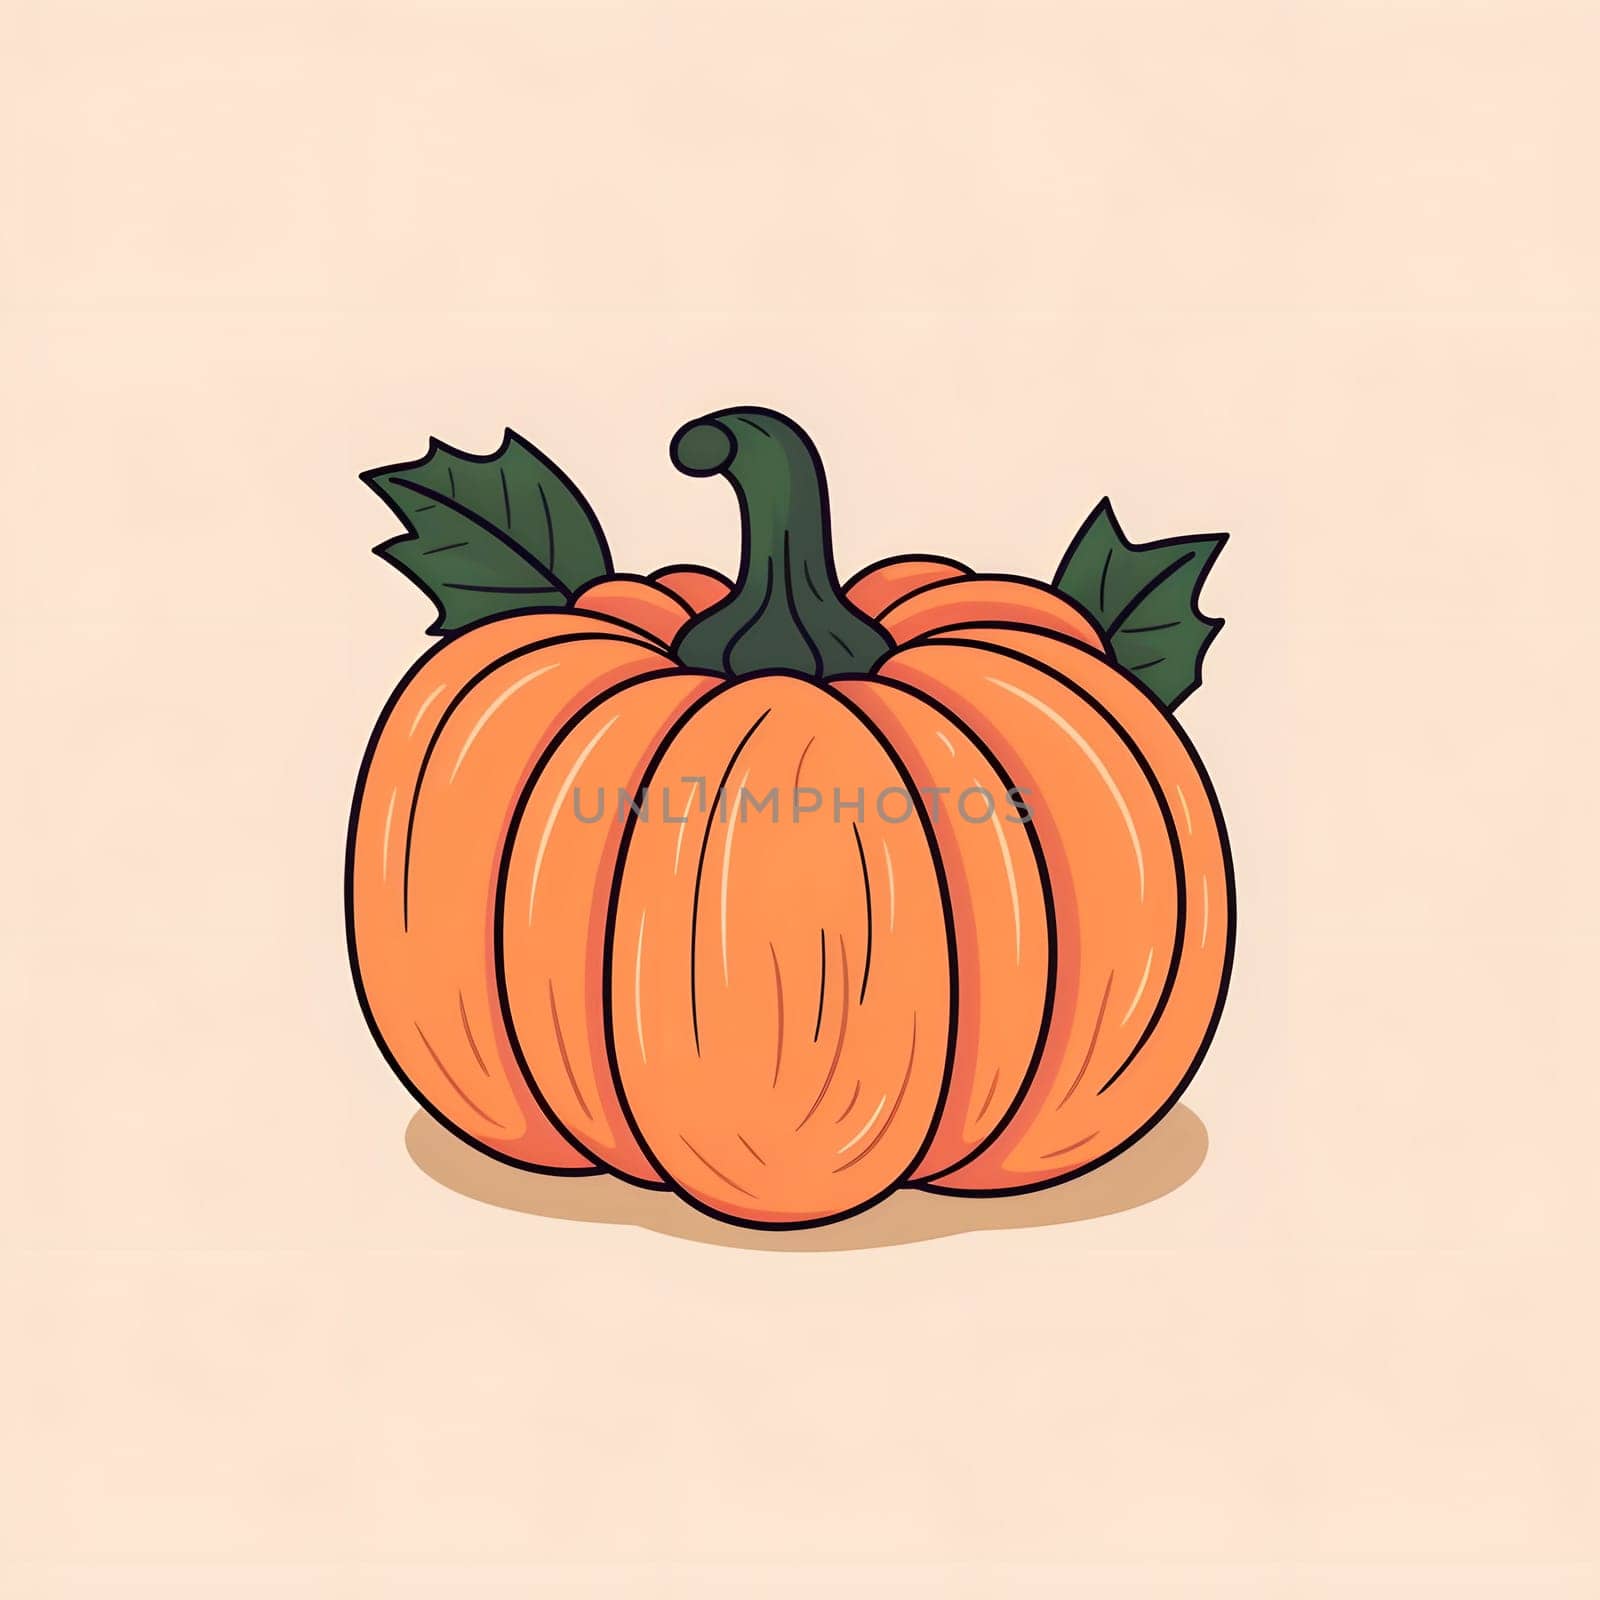 Illustration of a pumpkin with a leaf on a bright isolated background. Pumpkin as a dish of thanksgiving for the harvest. by ThemesS